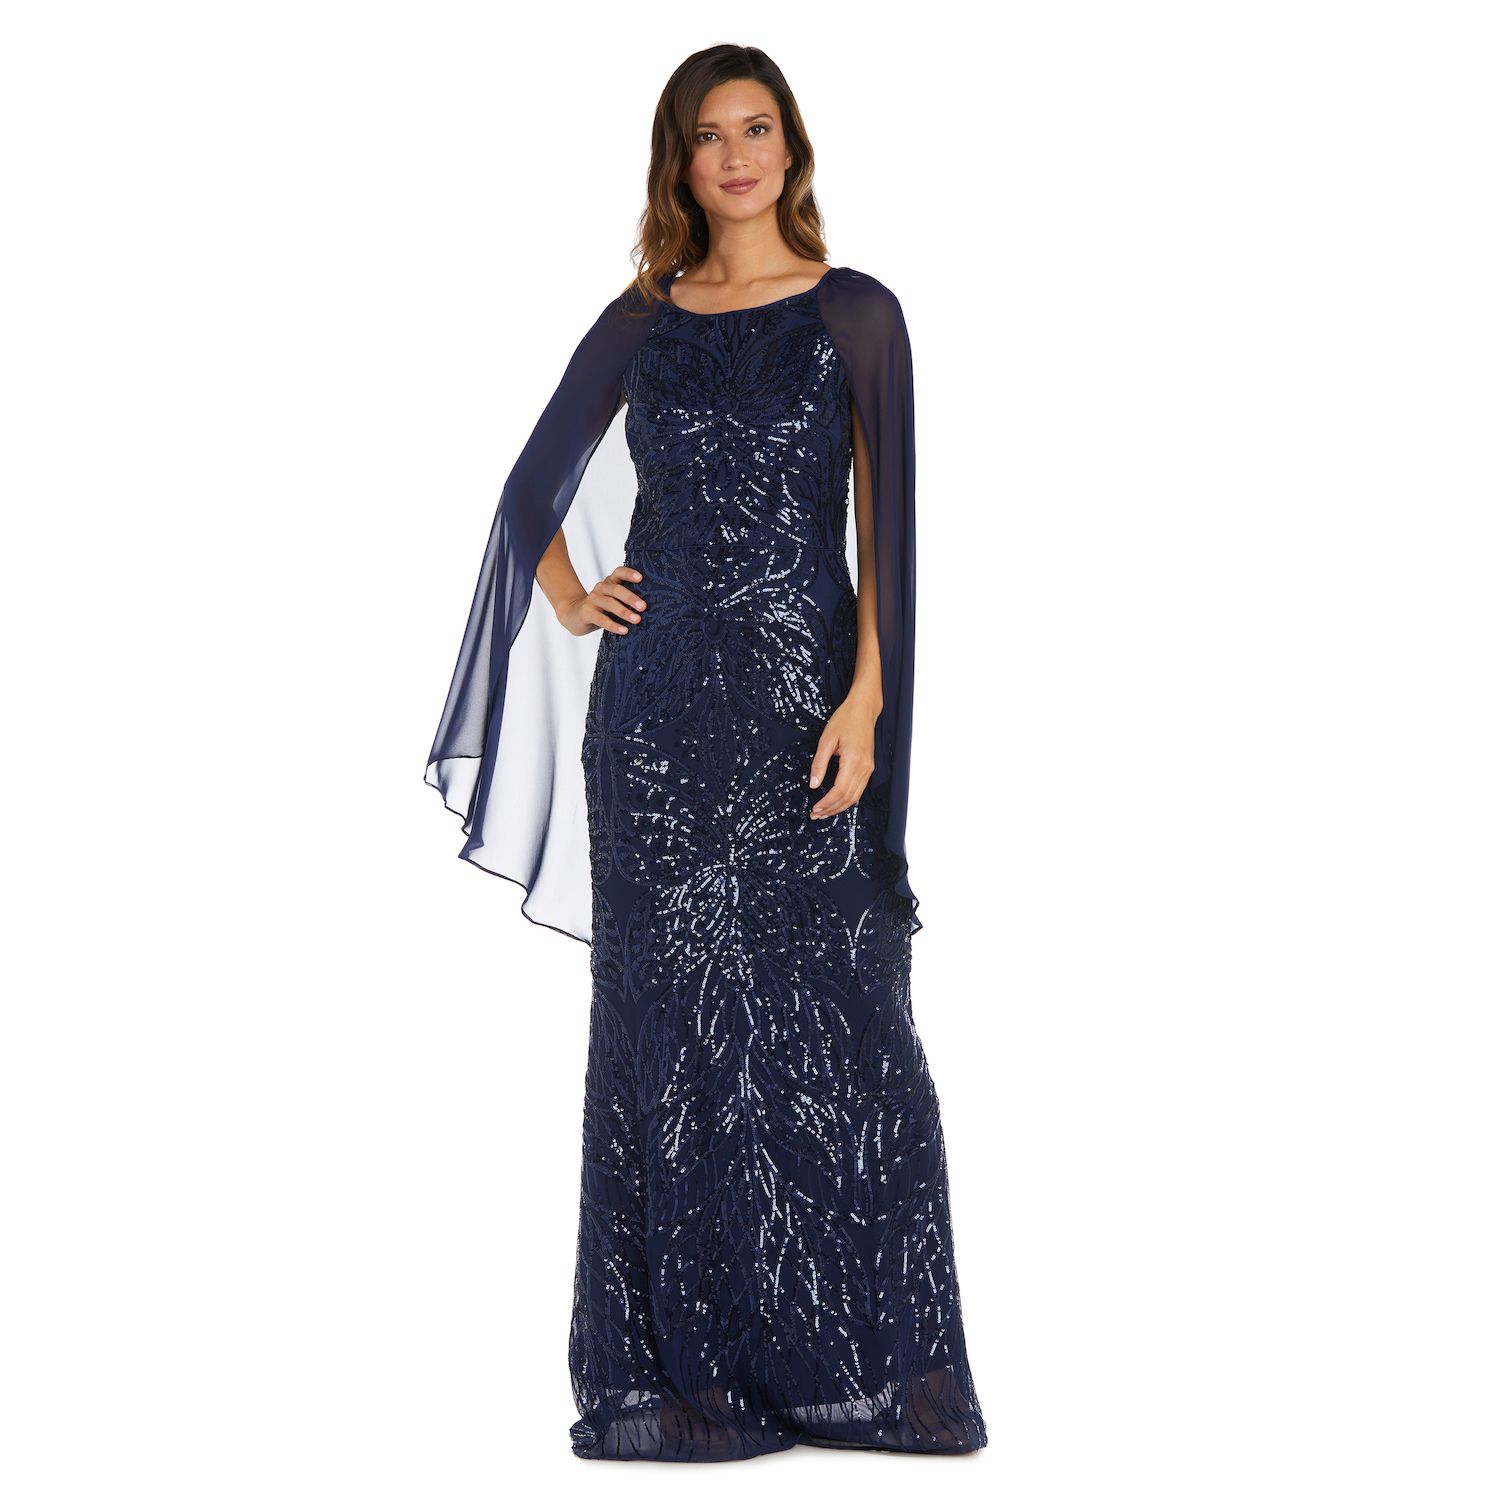 Women's R&M Richards Embroidered Sequin Lace Poncho & Maxi